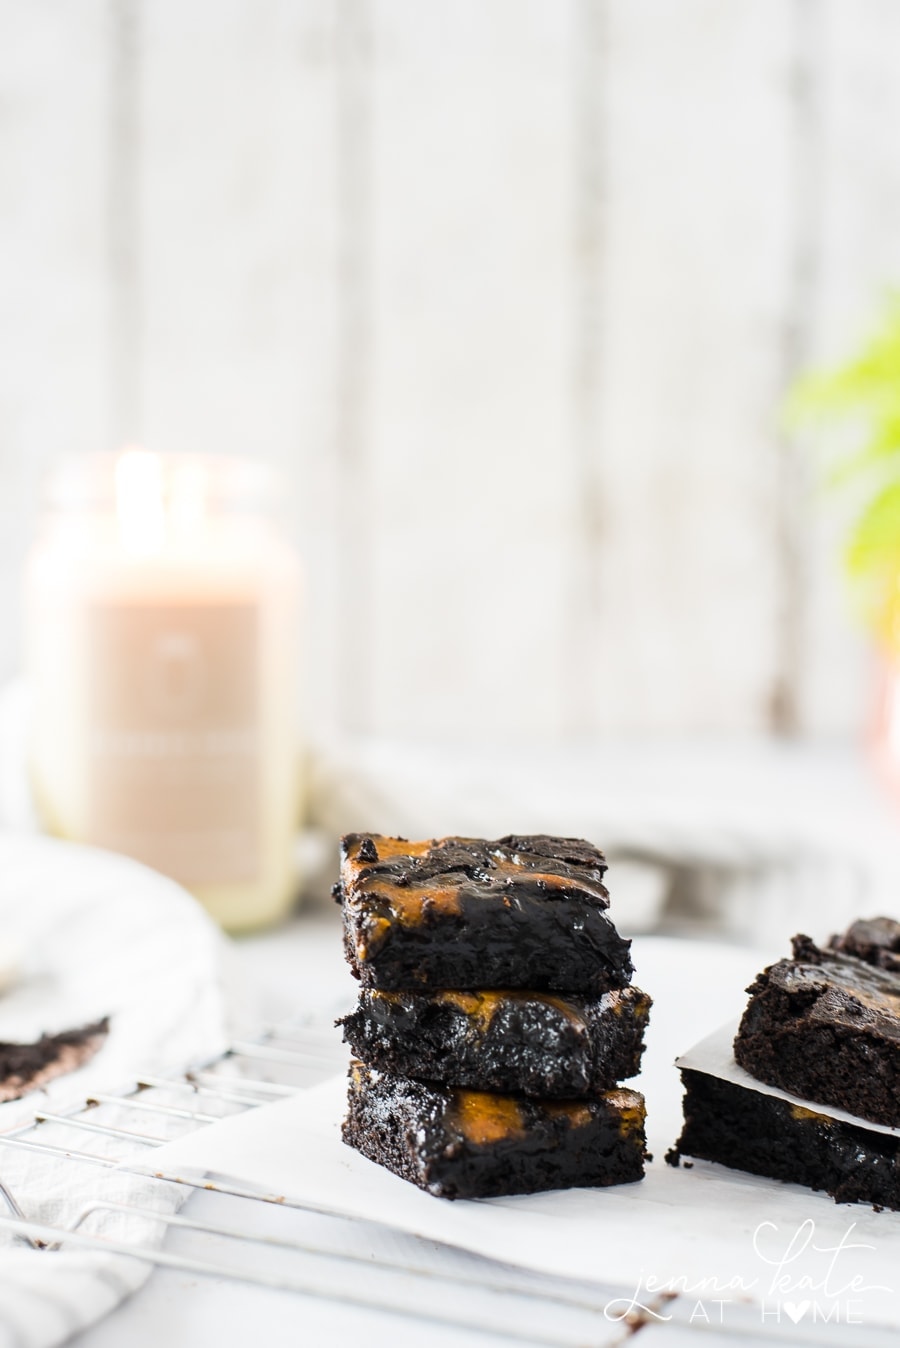 These pumpkin swirl brownies are the newbie on the fall dessert train but oh so delicious